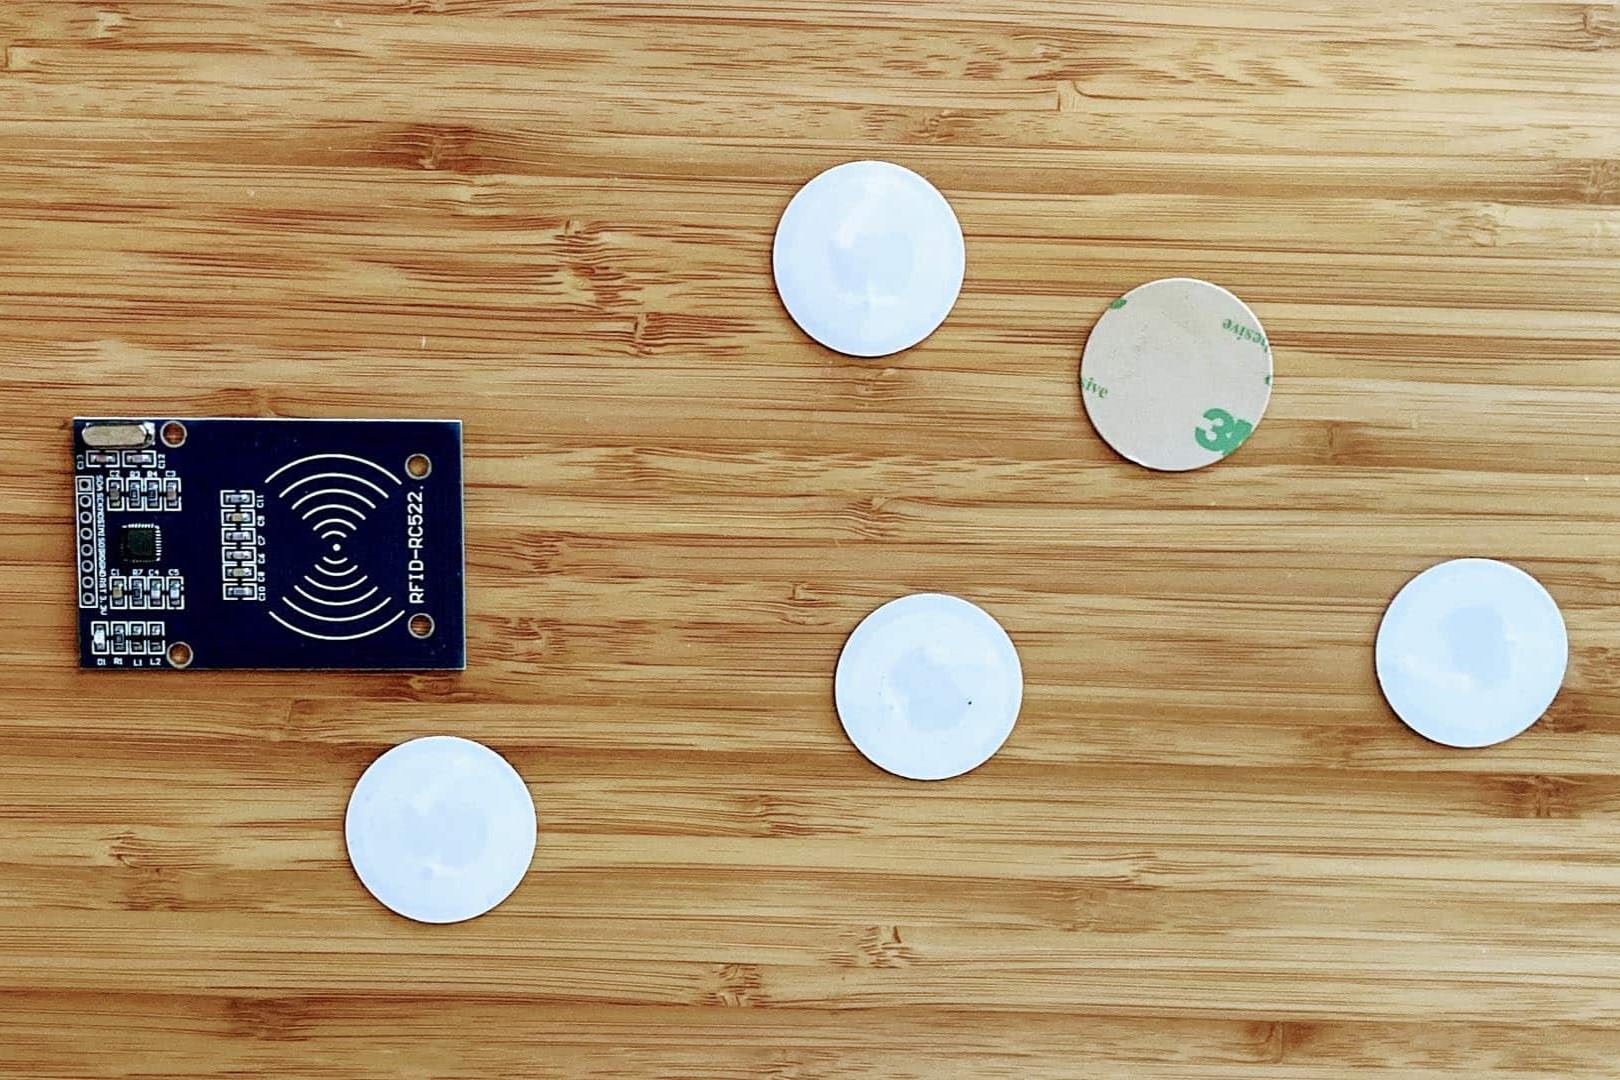 Automating Your Home: A Guide To Using NFC Tags